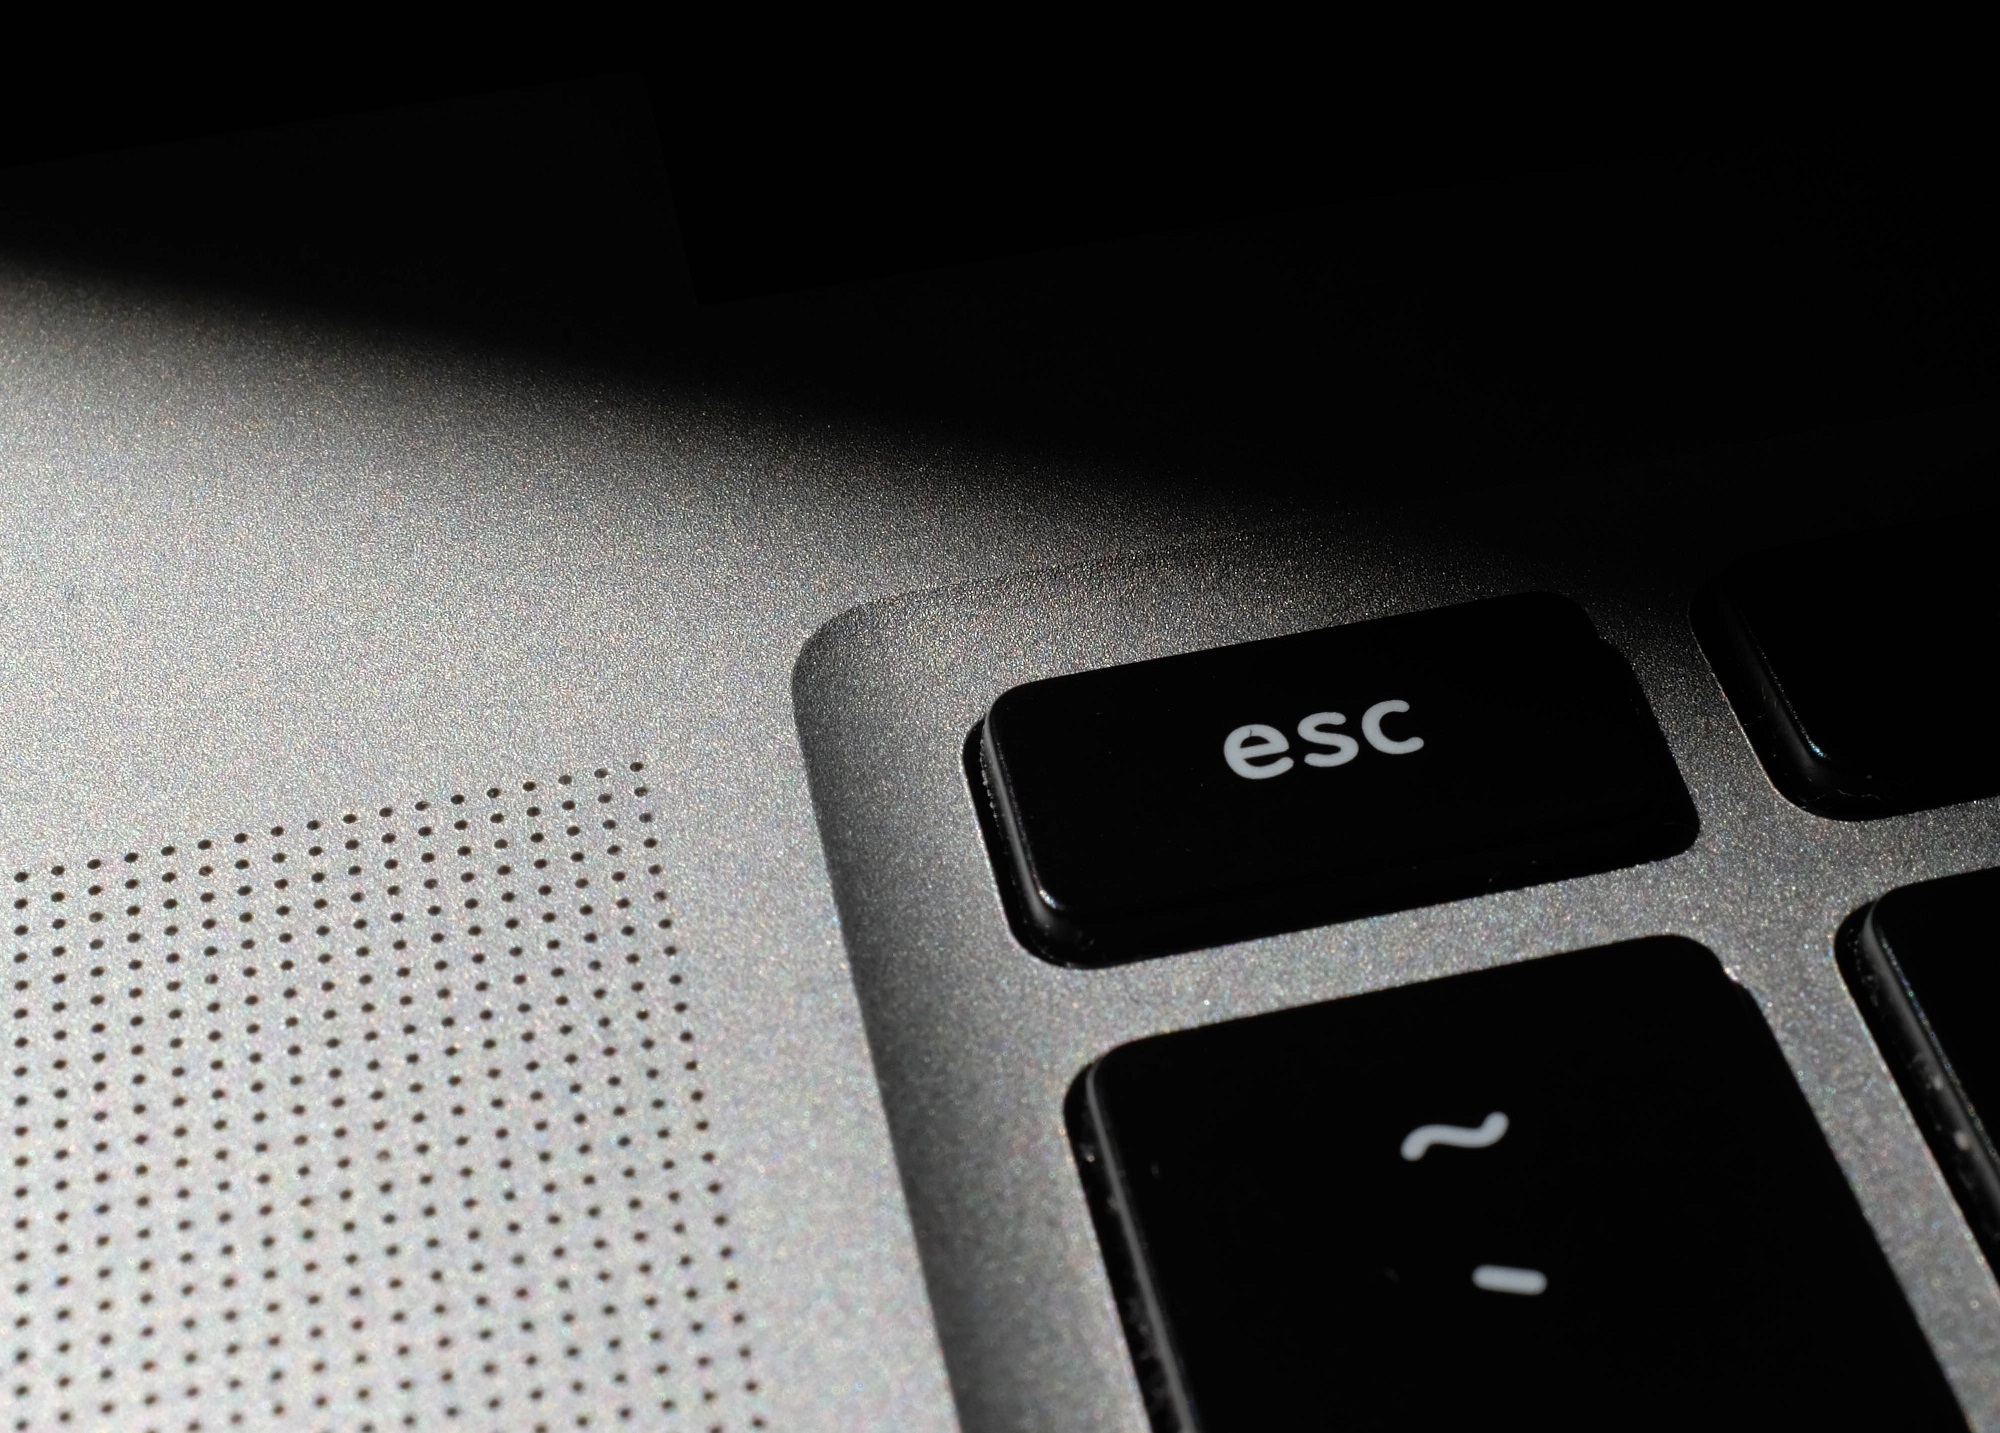 closeup of "esc" button on the corner of a keyboard